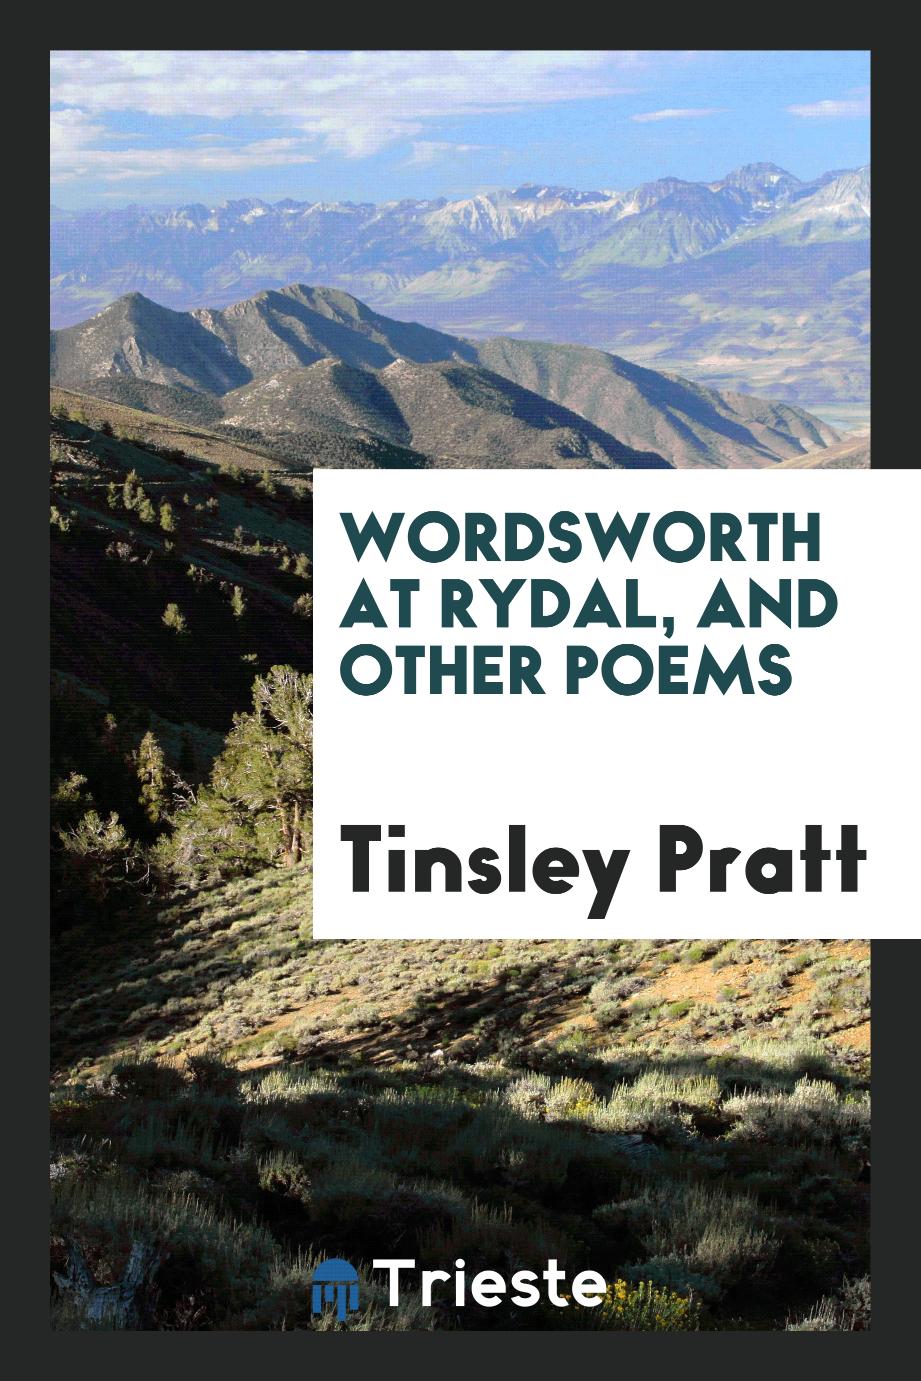 Wordsworth at Rydal, and Other Poems